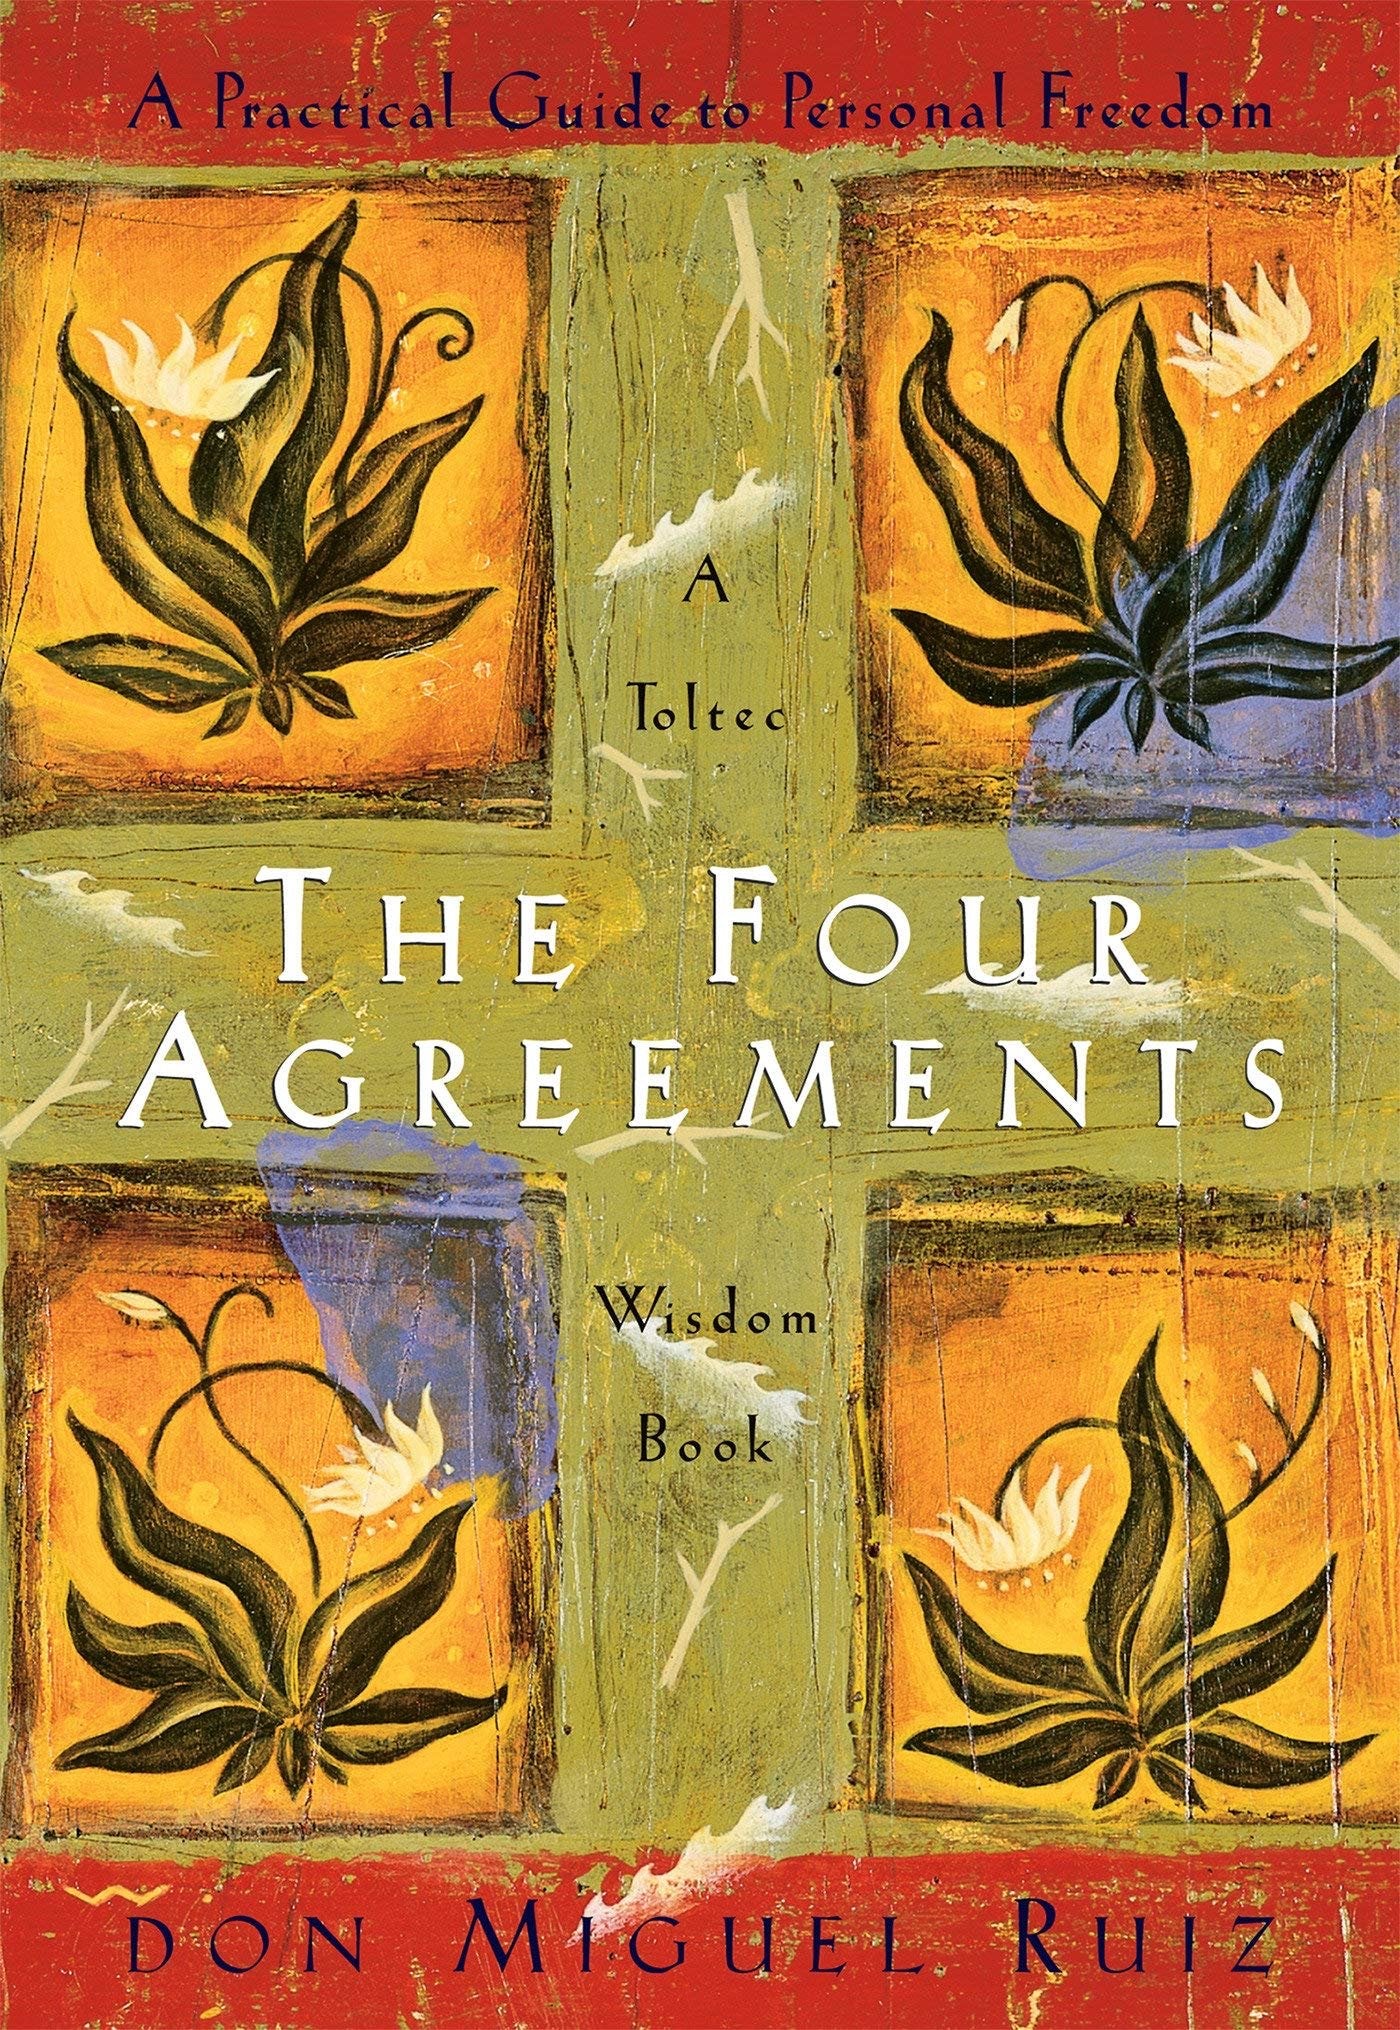 Book cover of The Four Agreements by Don Miguel Ruiz.